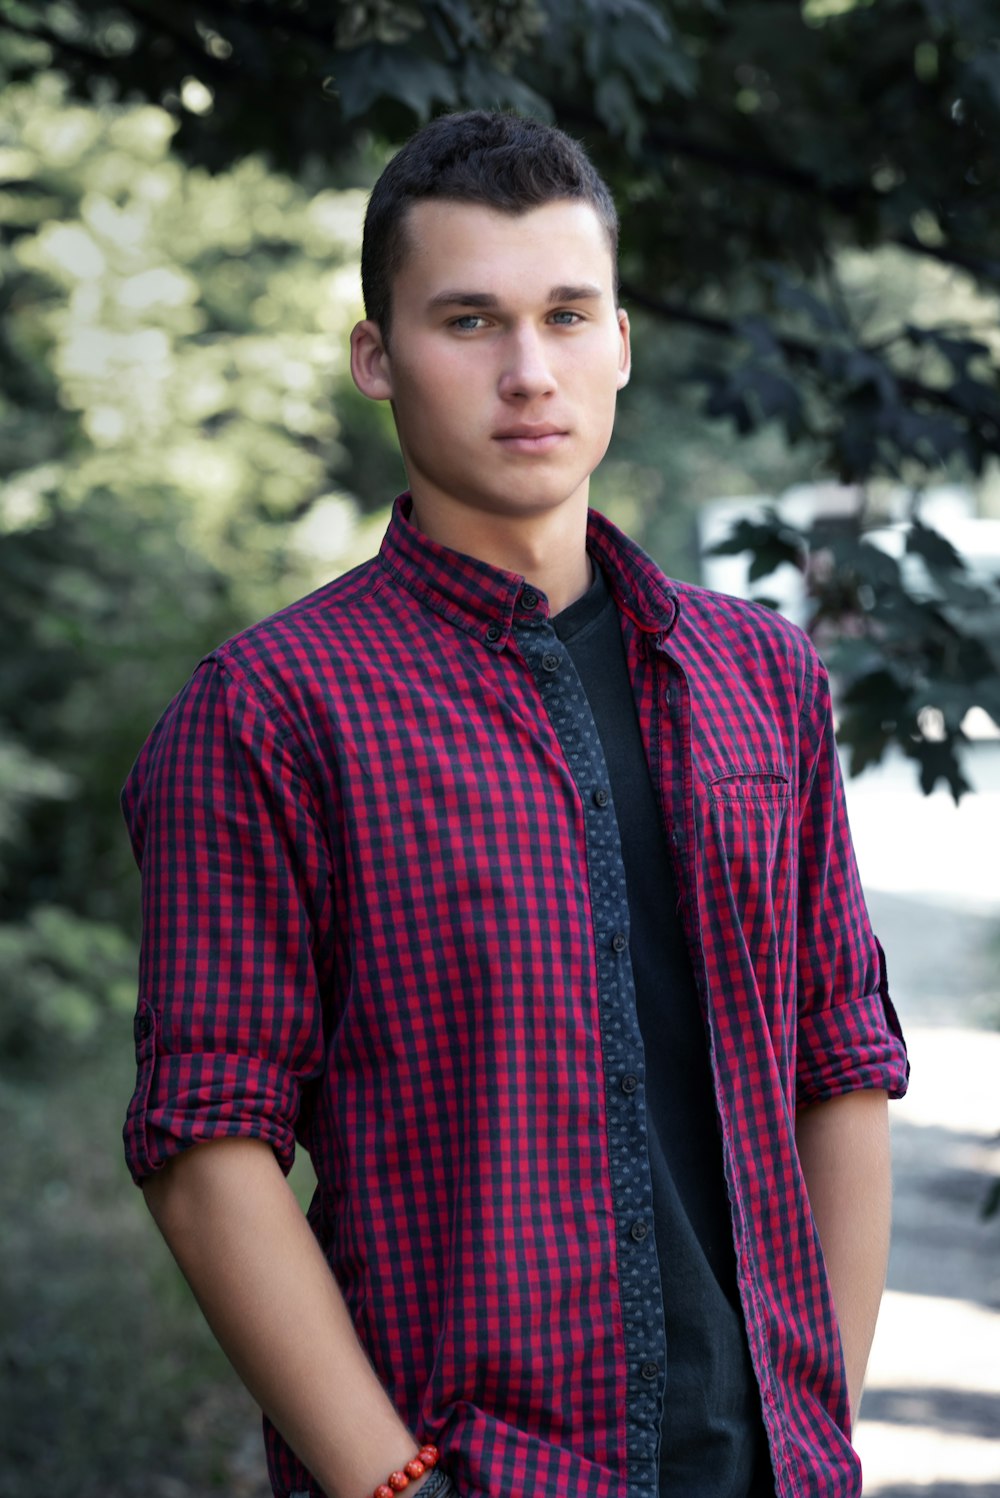 boy in red and black plaid button up shirt standing near green trees during daytime